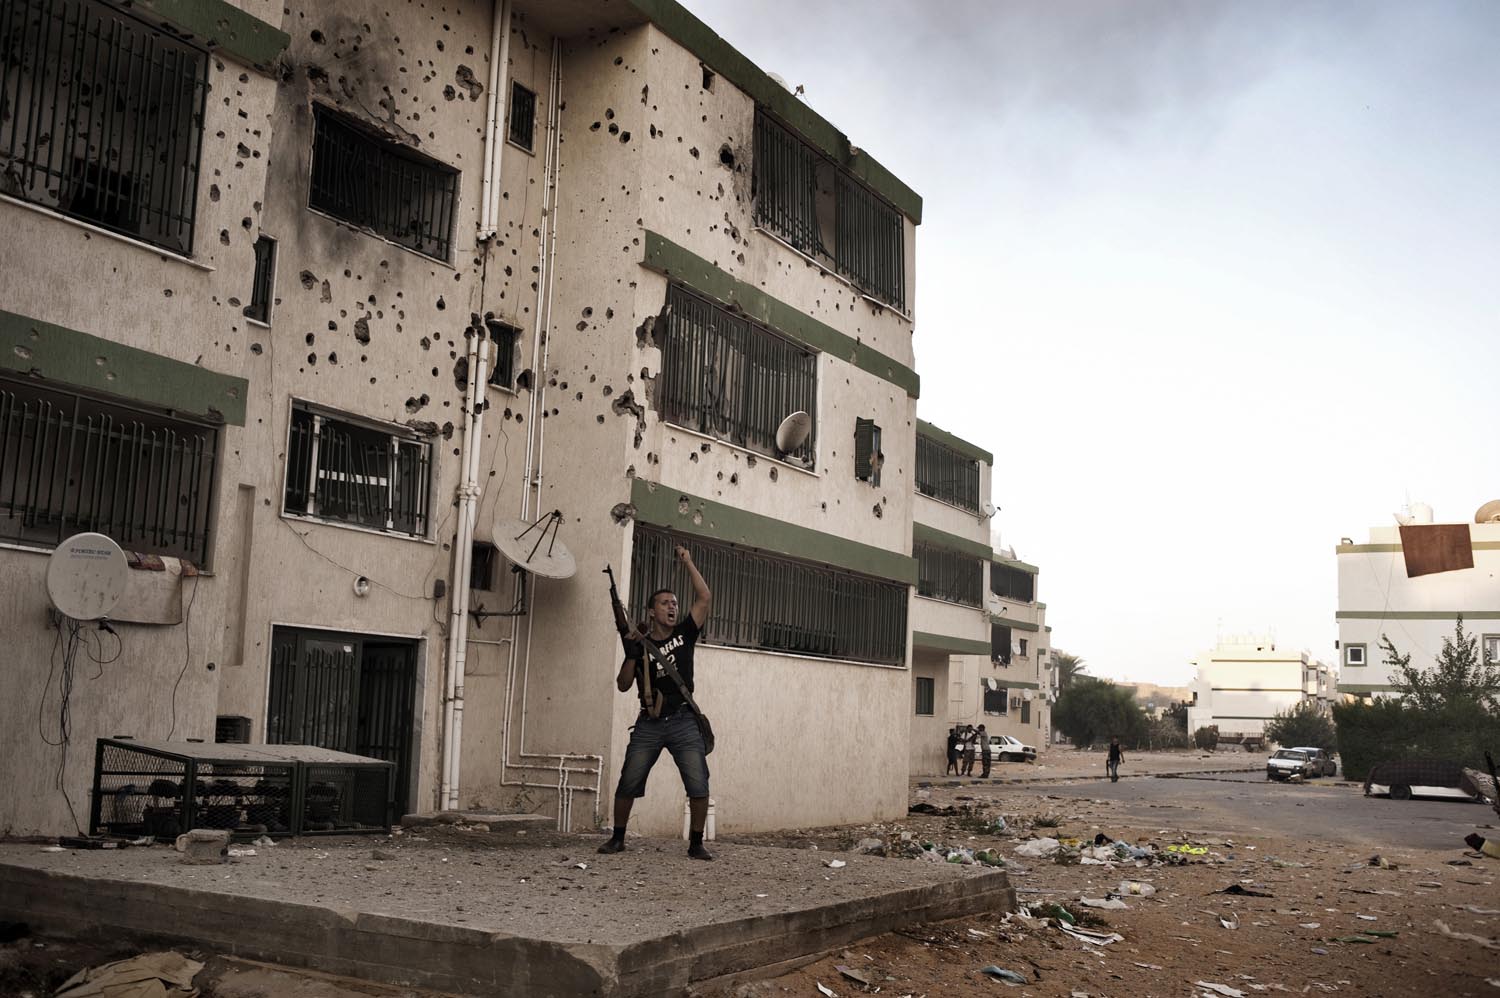 A rebel soldier motions to fellow fighters during clashes with Gaddafi loyalists in Abu Slim, August 25, 2011. Not far from Col. Muammar Gaddafi's fortified Bab al-Aziziya compound, Abu Slim has long been a Gaddafi stronghold; populated by government officials, military officers, and regime supporters.